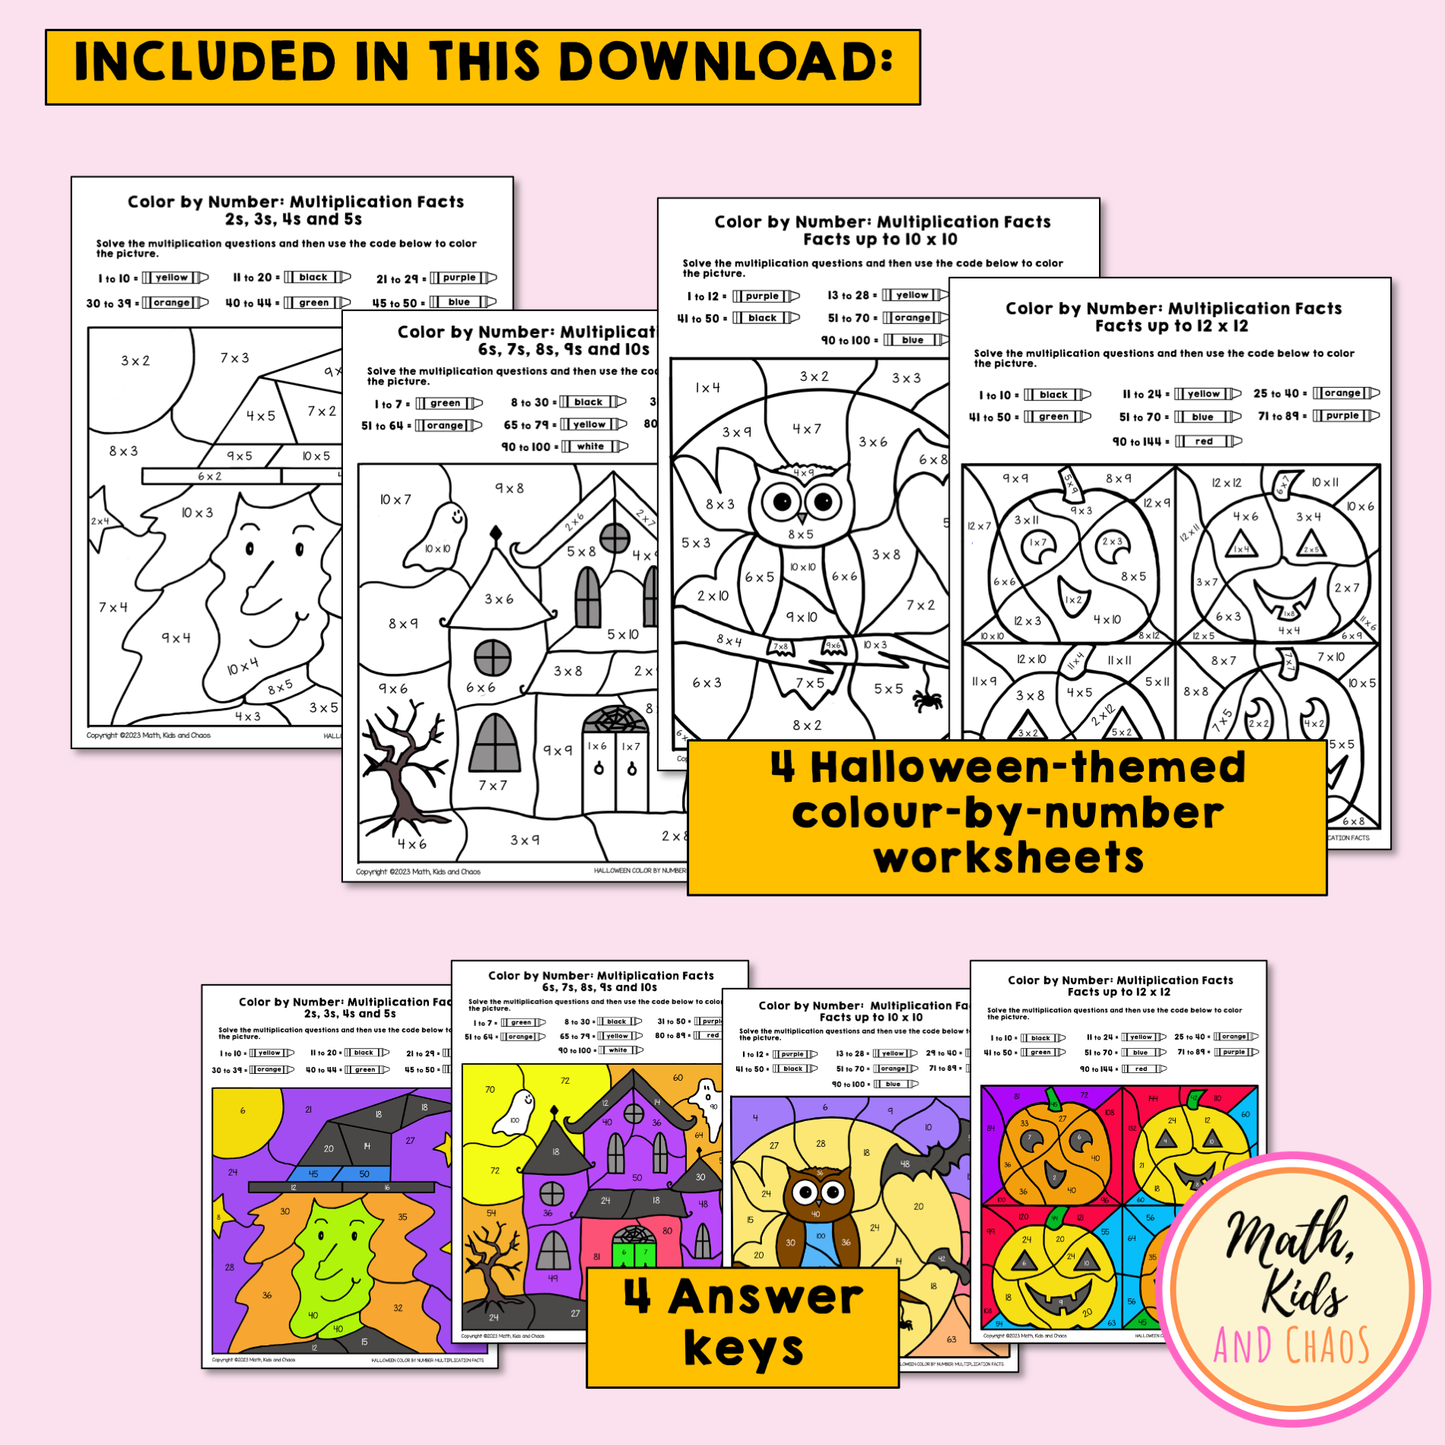 Halloween Colour-by-Number Multiplication Facts Worksheets (Canada/Australia/UK Spelling)